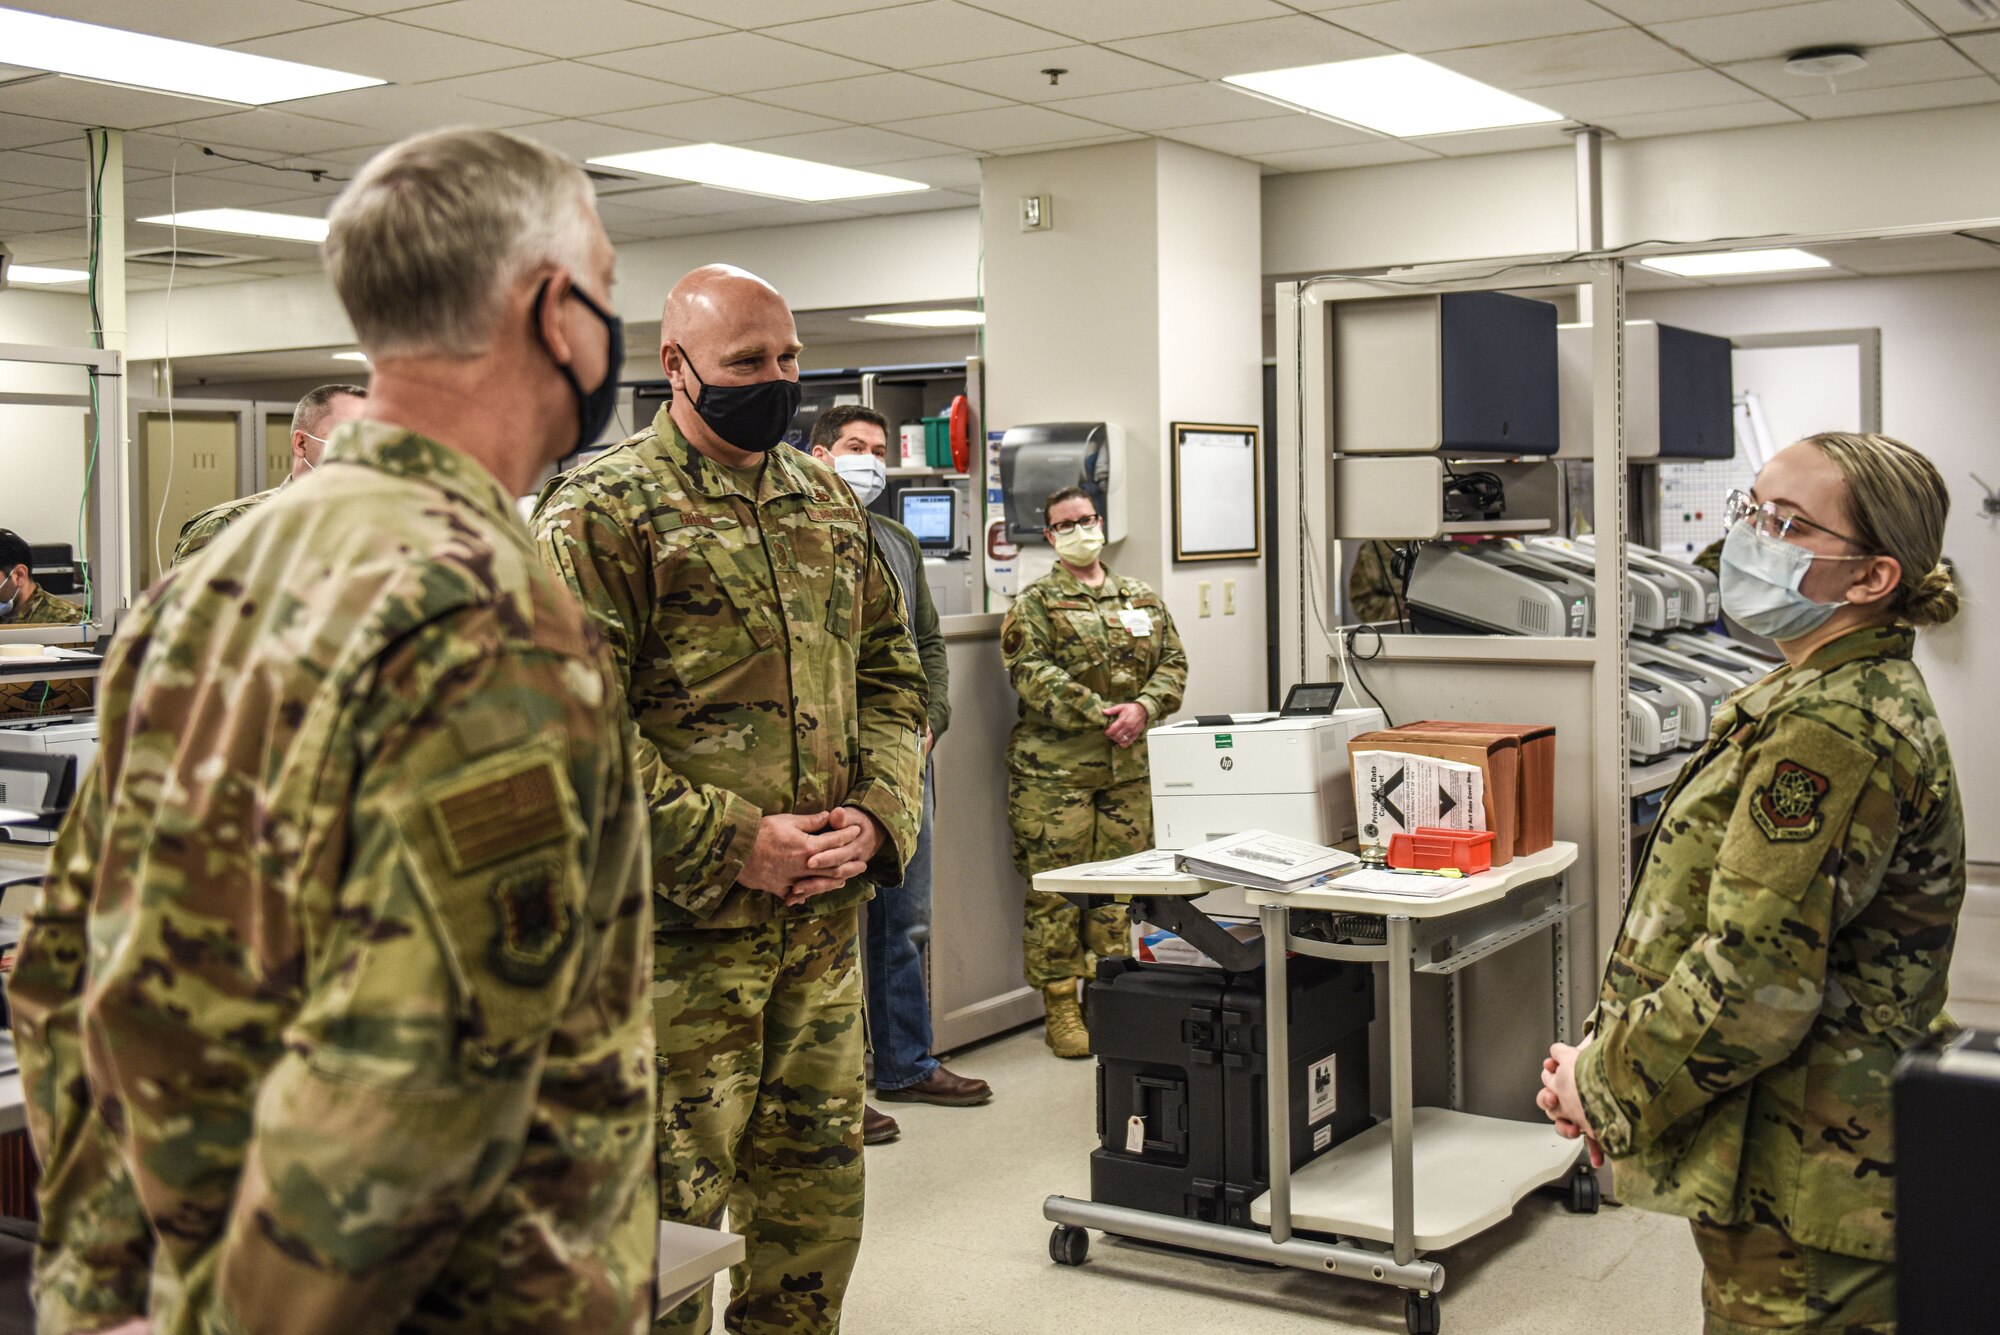 U.S. The Air Force Expeditionary Center command team is briefed on COVID-19 sample testing procedures during their visit to the 87th Air Base Wing at Joint Base McGuire-Dix-Lakehurst, New Jersey, Jan. 13, 2021. The 87th MDG lab technicians are critical in determining whether or not a patient has contracted COVID-19 by analyzing blood samples. (U.S. Air Force photo by Senior Airman Shay Stuart)